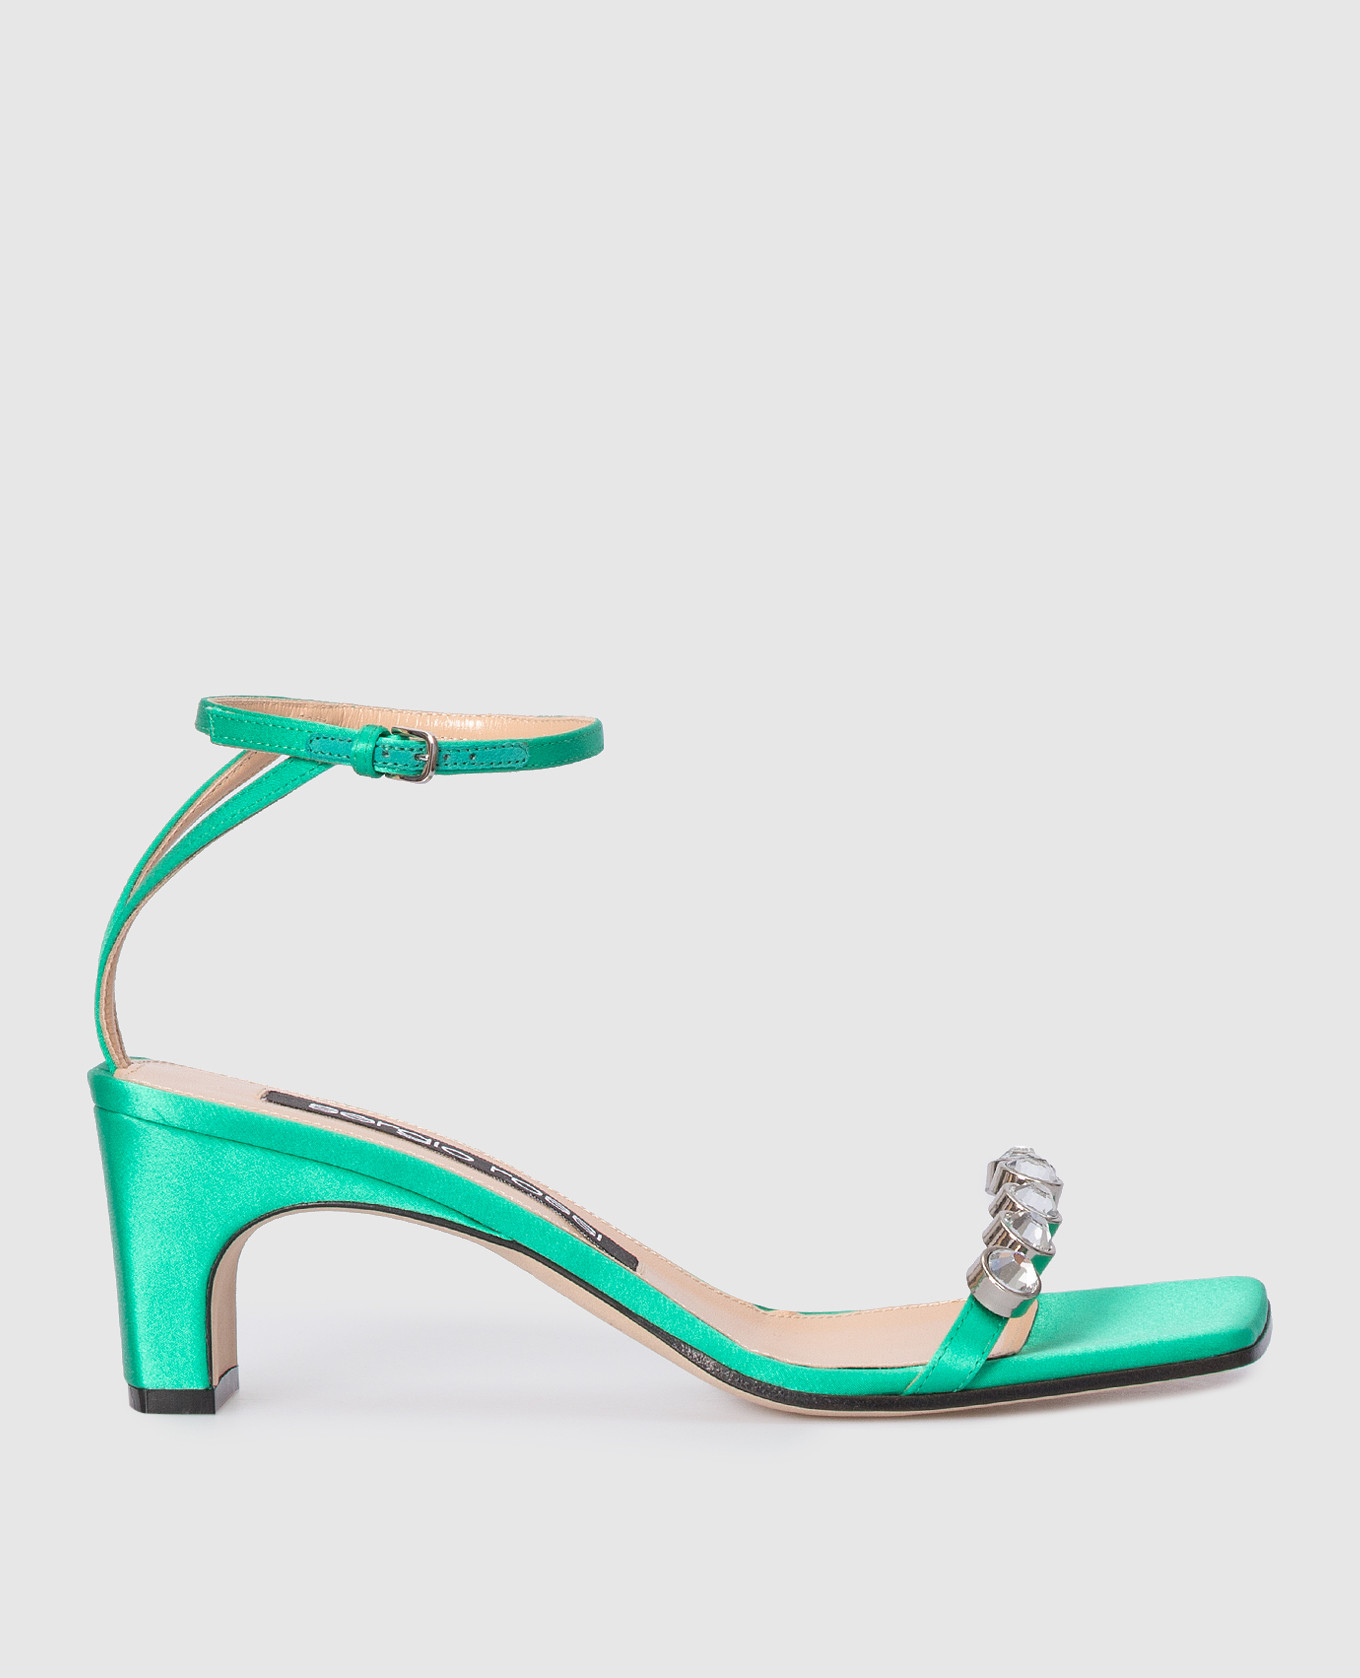 Green sandals with crystals